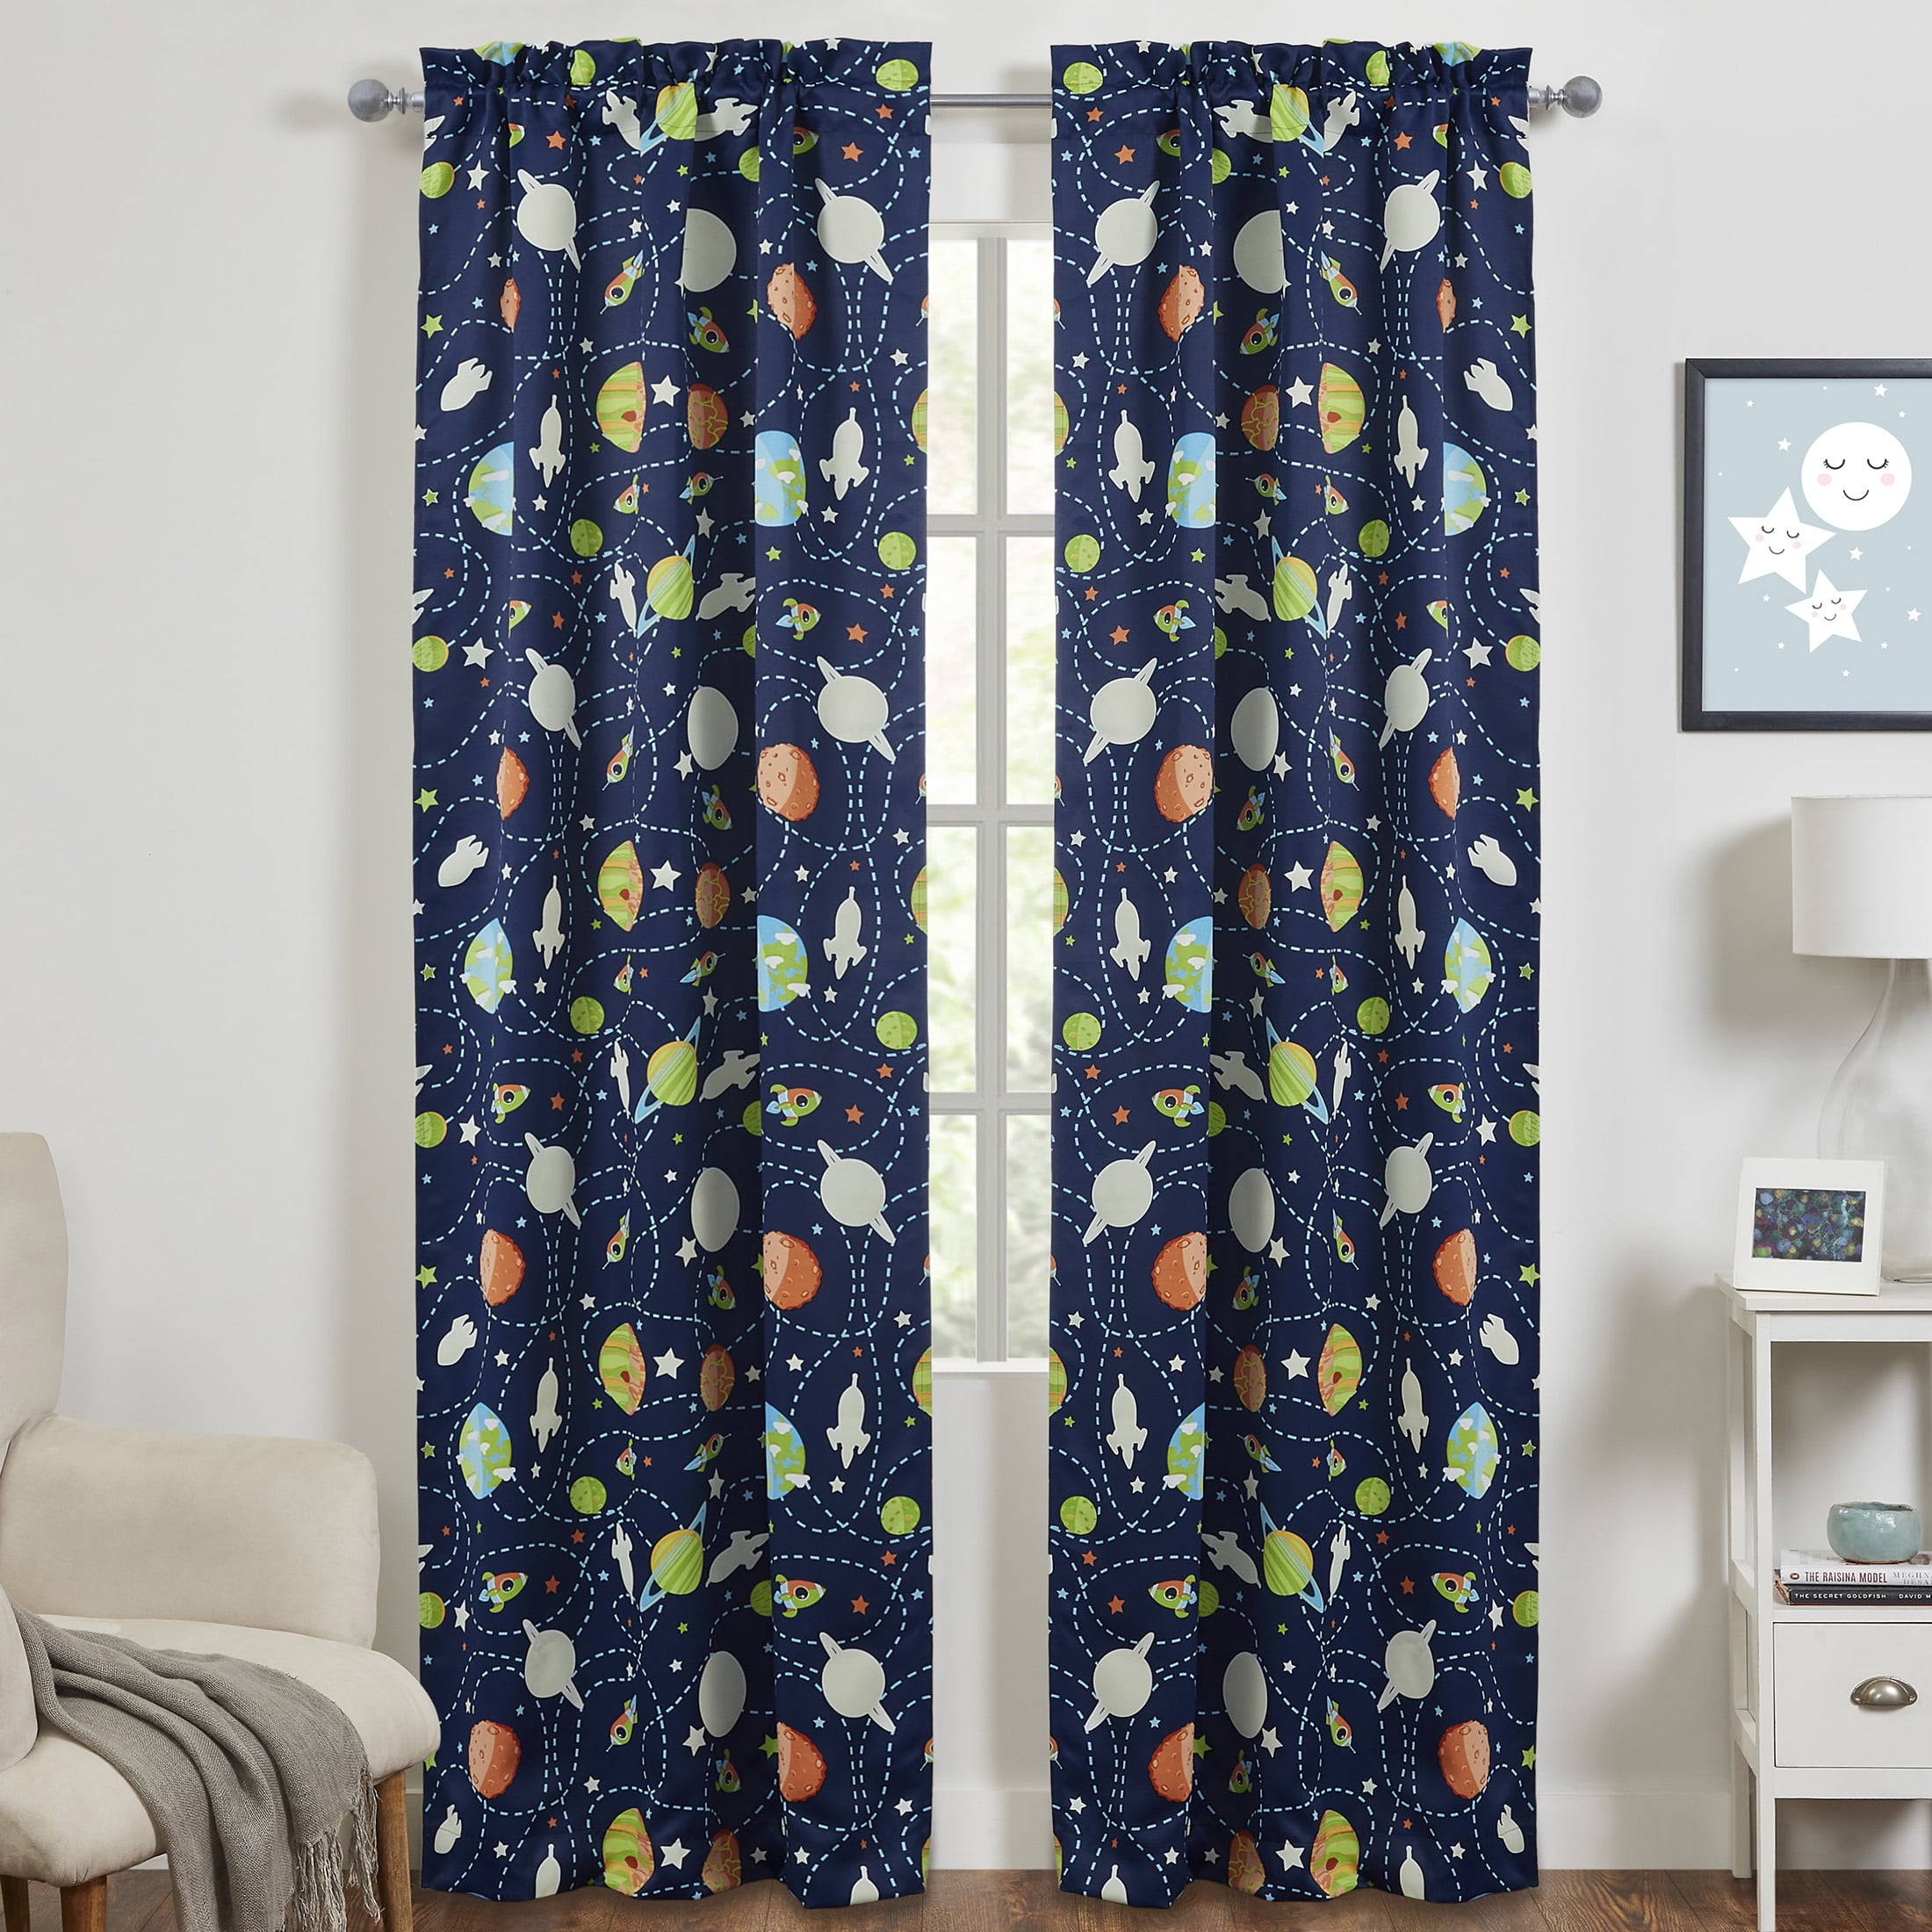 Manchester City One Pair Of Curtains Crest 66" x 72" Drop Kids Bedroom 